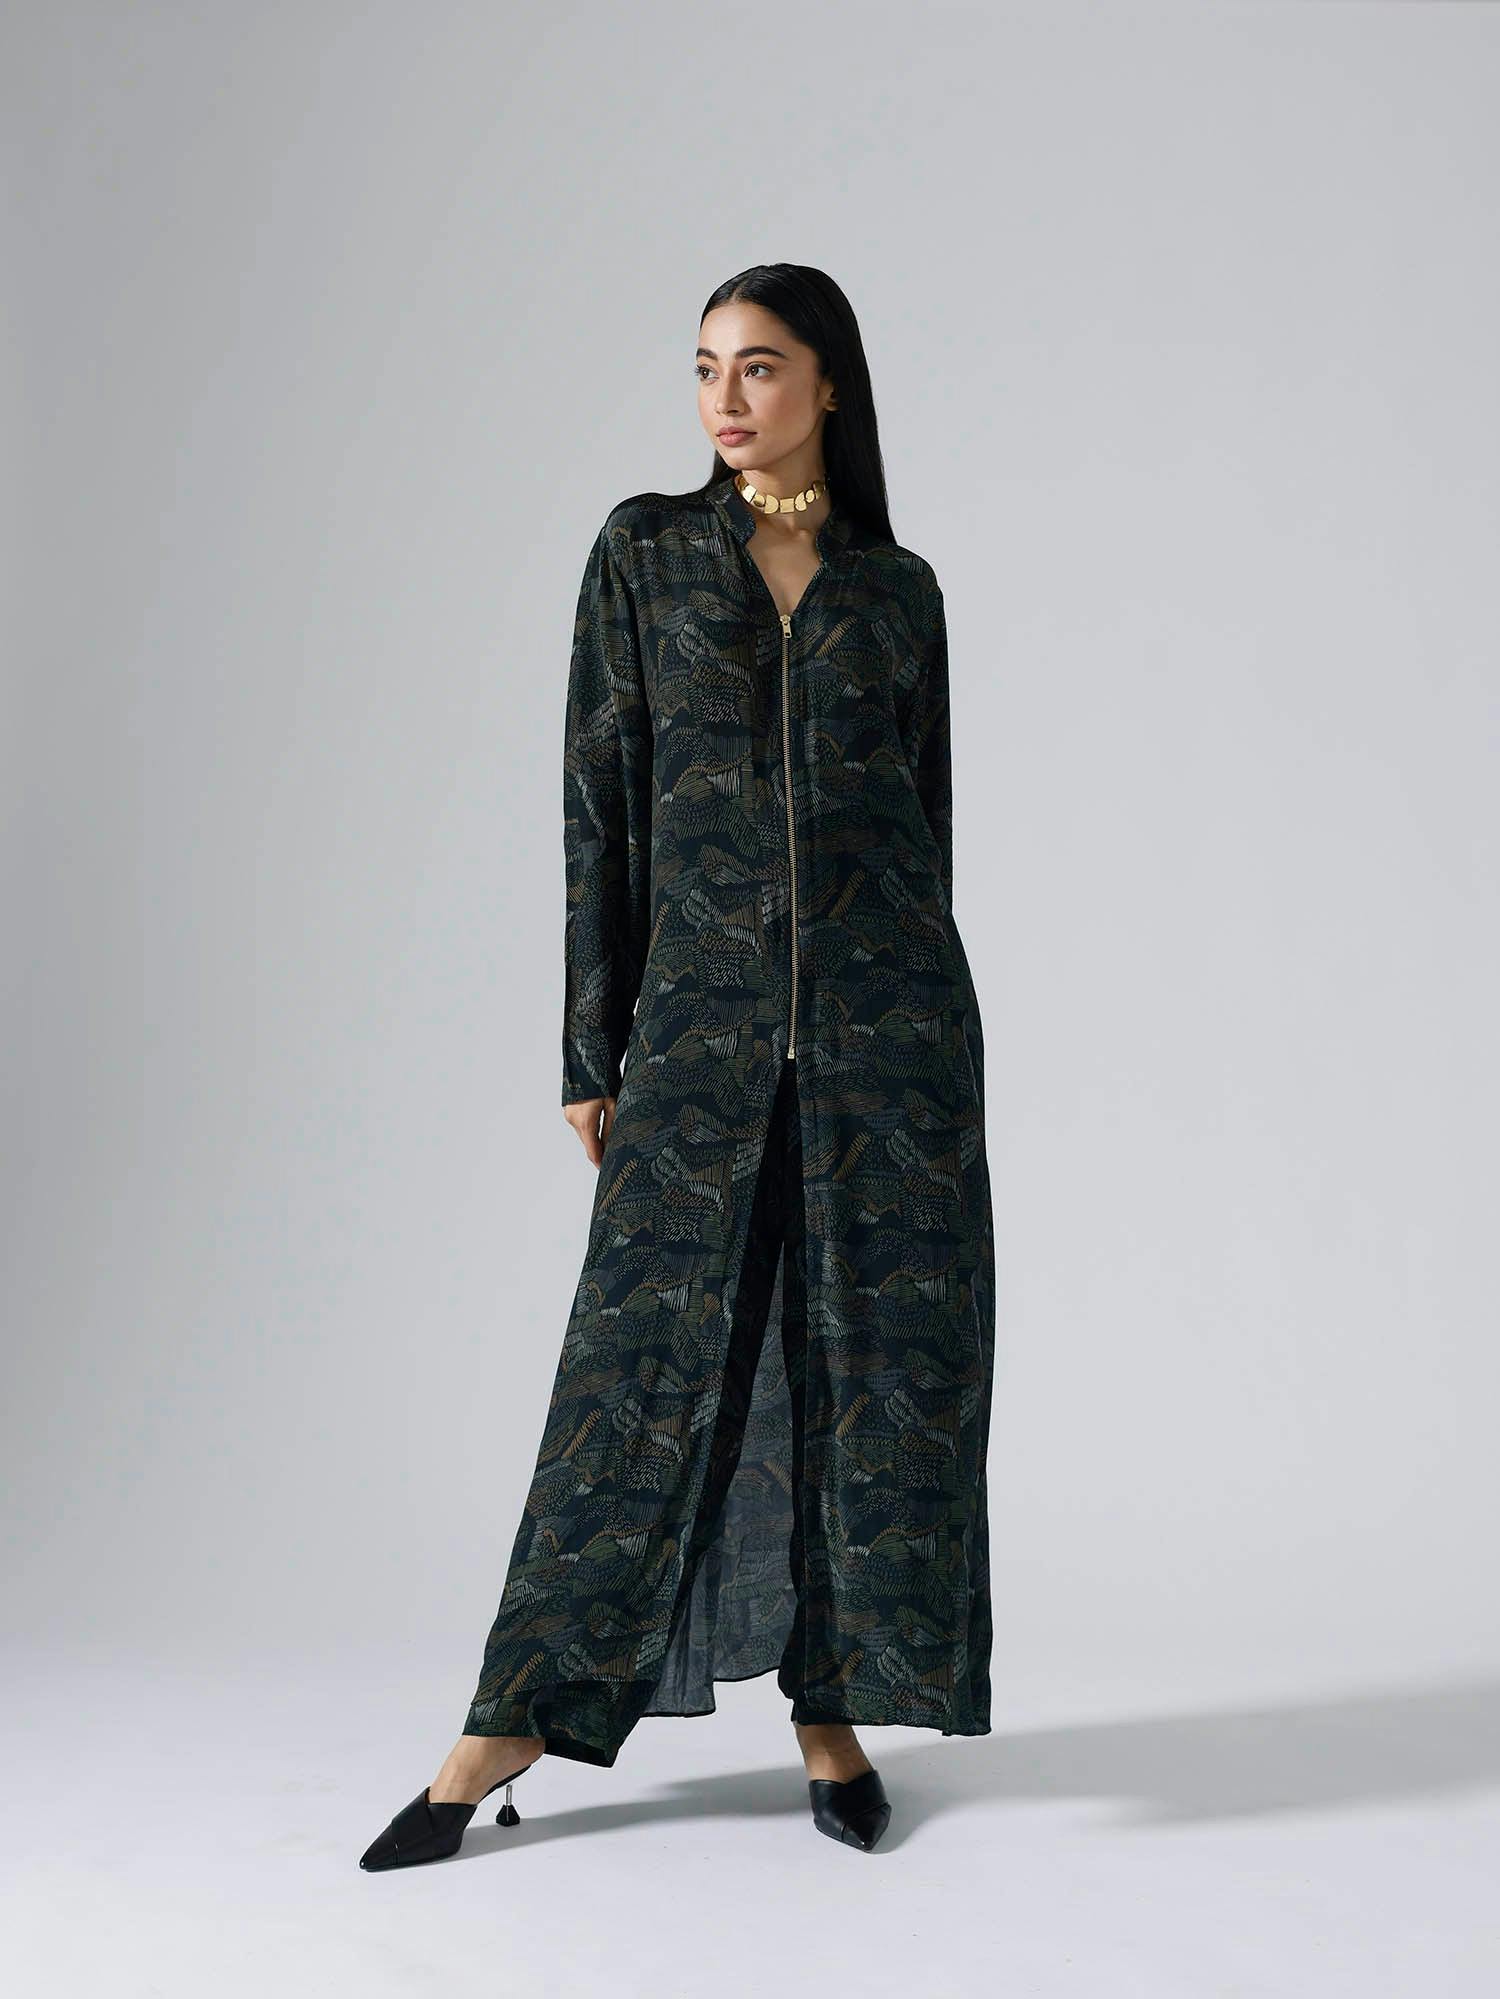 Lines Zipped Jacket Set With Coordinated Pants, a product by KLAD